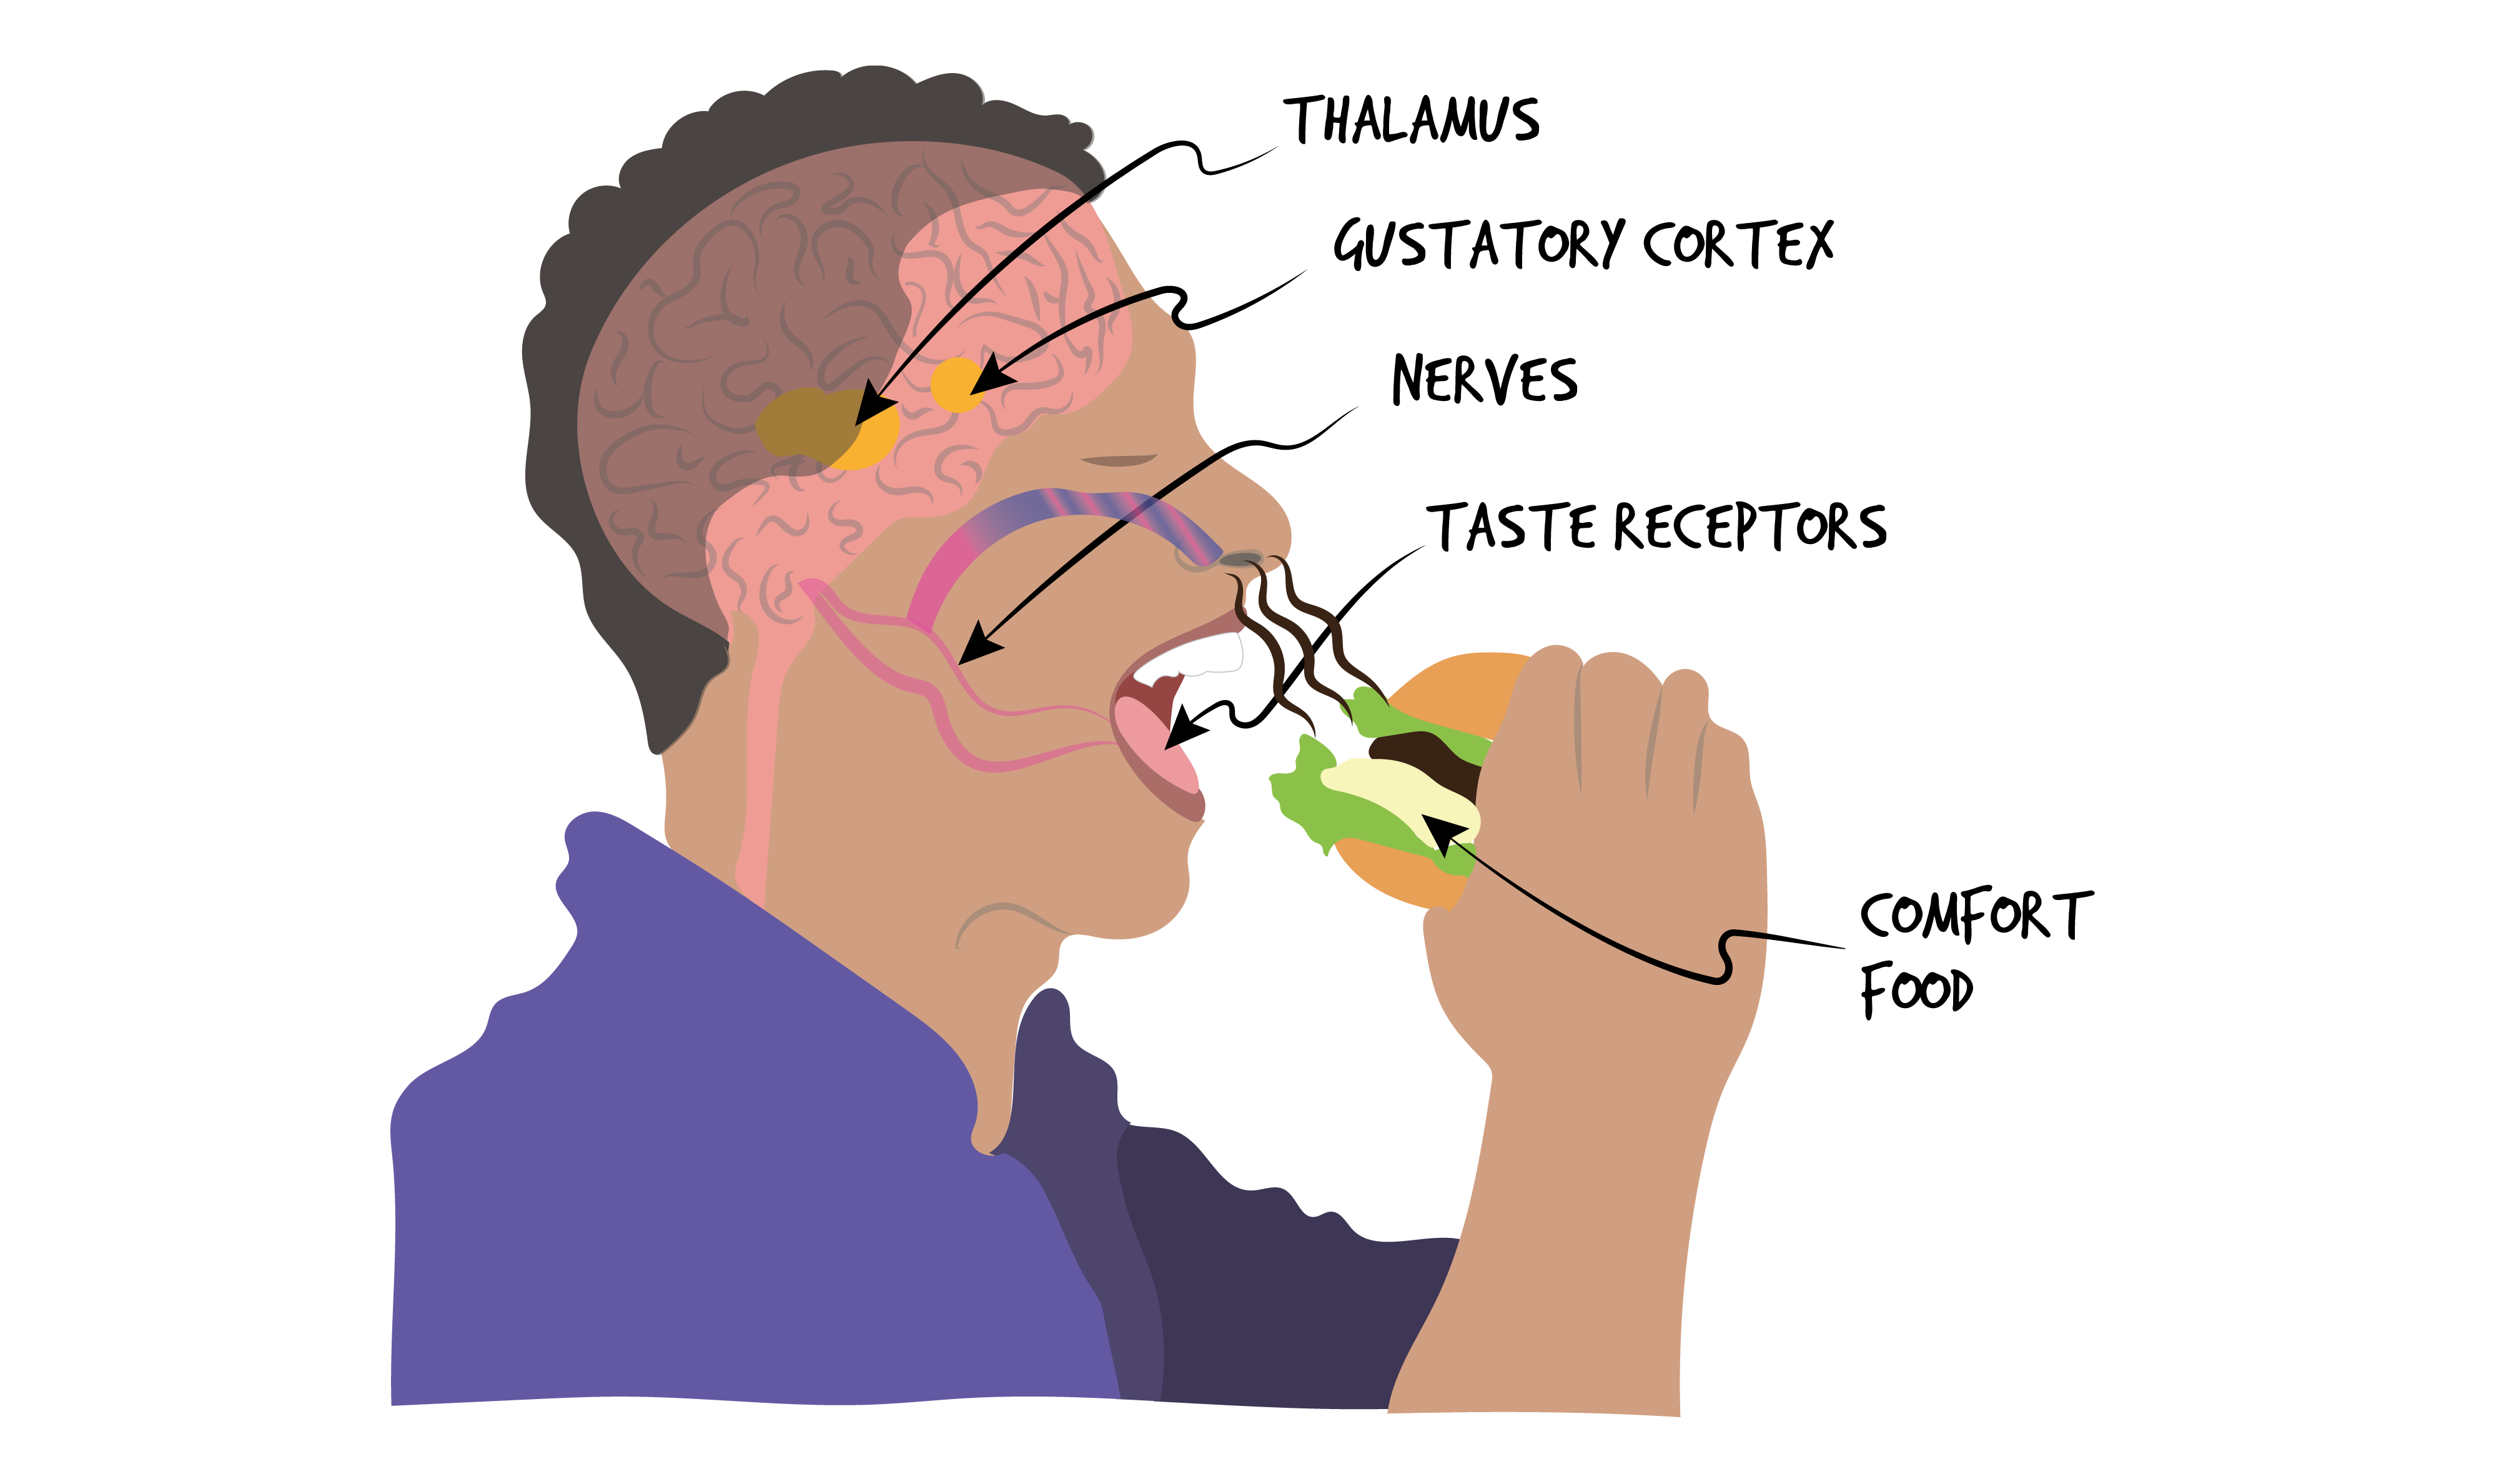 Side view of person wearing a purple shirt. Person is eating a burger with text Comfort food pointing to it. There is an x-ray view of the head. Pink brain; a yellow piece is on the brain with limbic system pointing to the main part; olfactory bulb pointing to a yellow tube part attached to the main part; a pink and purple tube going from the nose, down the throat with nasal cavity pointing to it.